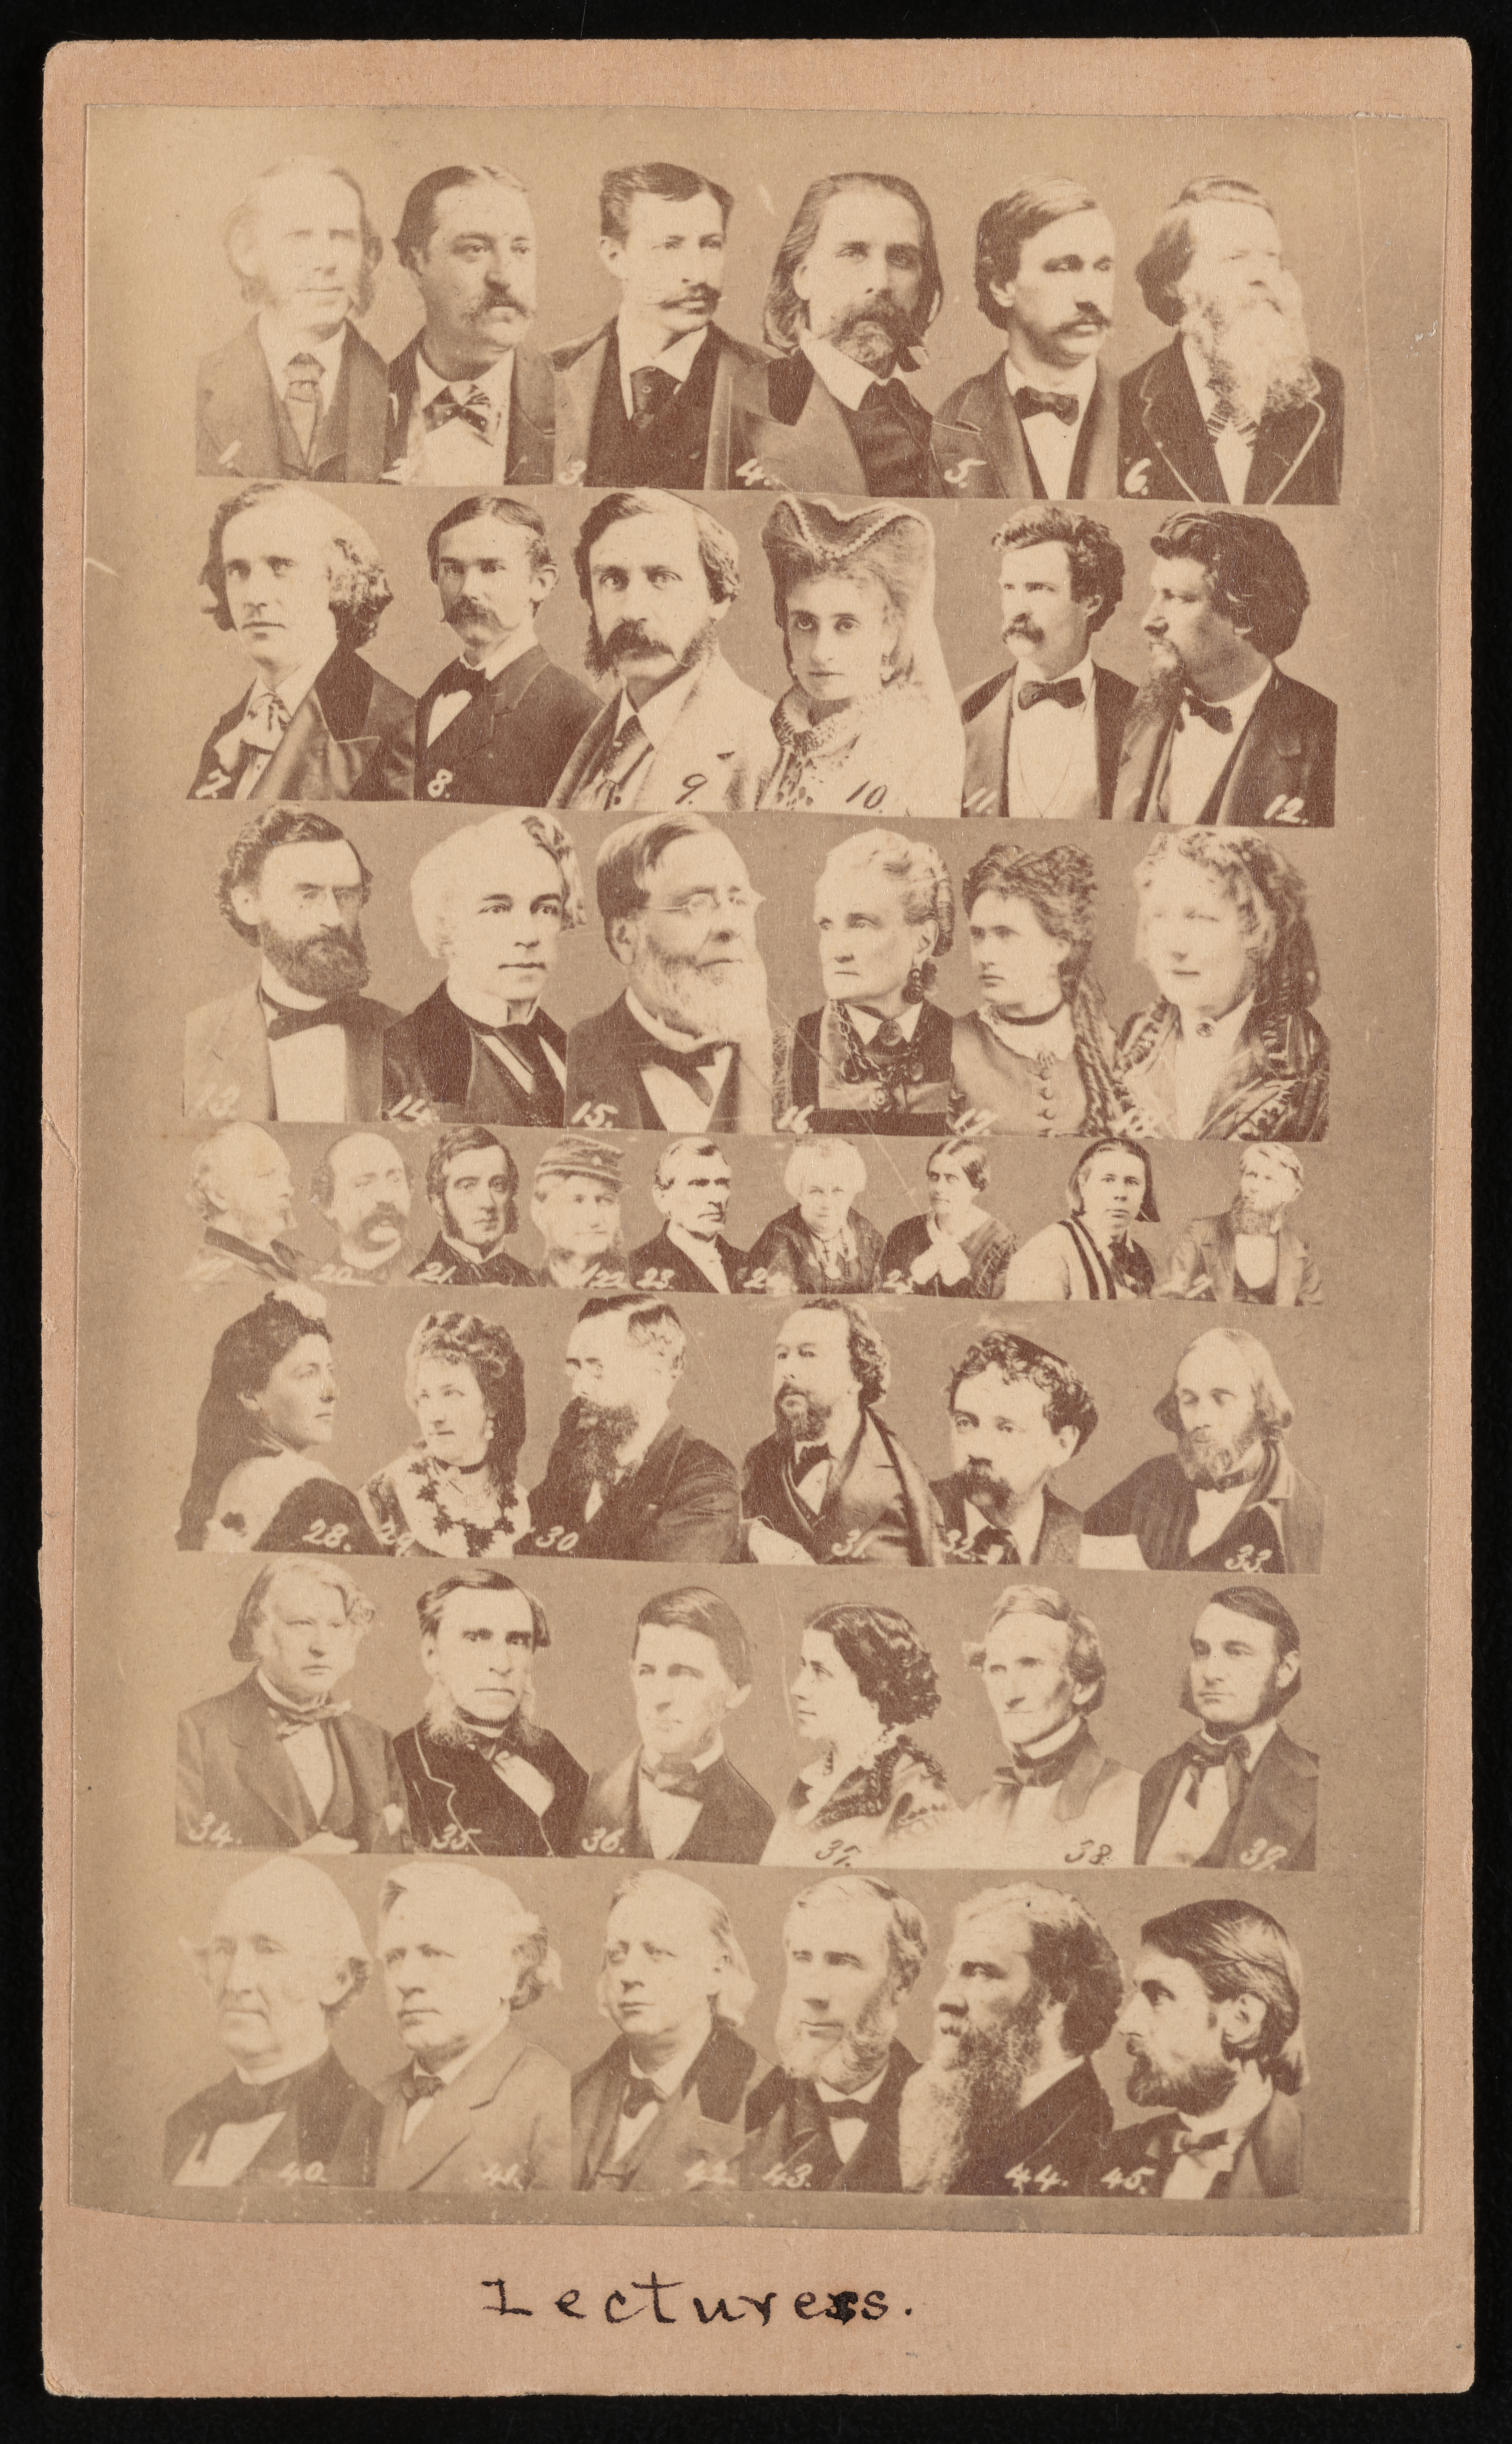 Portraits, from the shoulders and up, of white men and women are put together in rows and slightly o